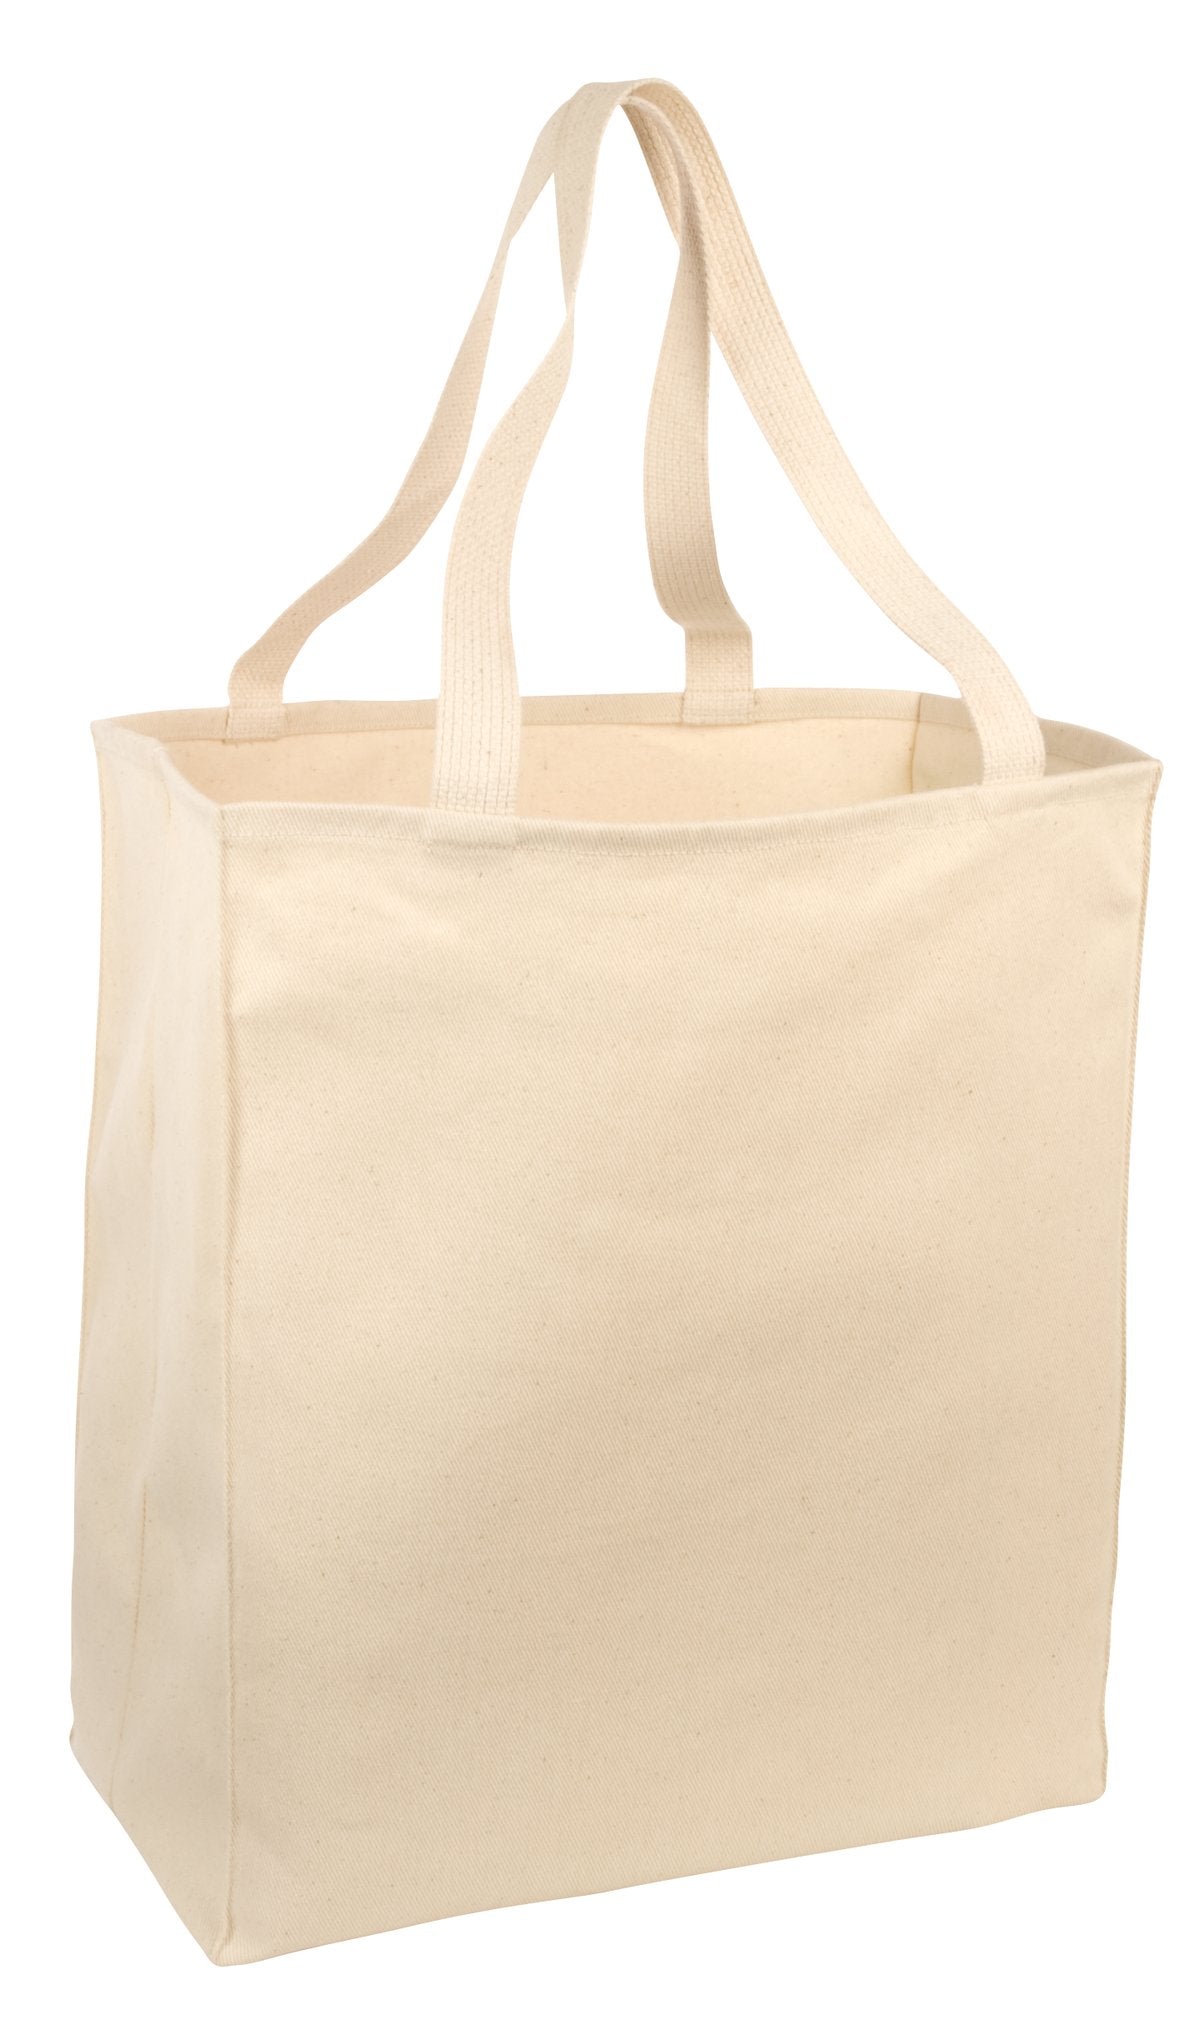 Port Authority® Ideal Twill Over-the-Shoulder Grocery Tote. B110 - DFW Impression